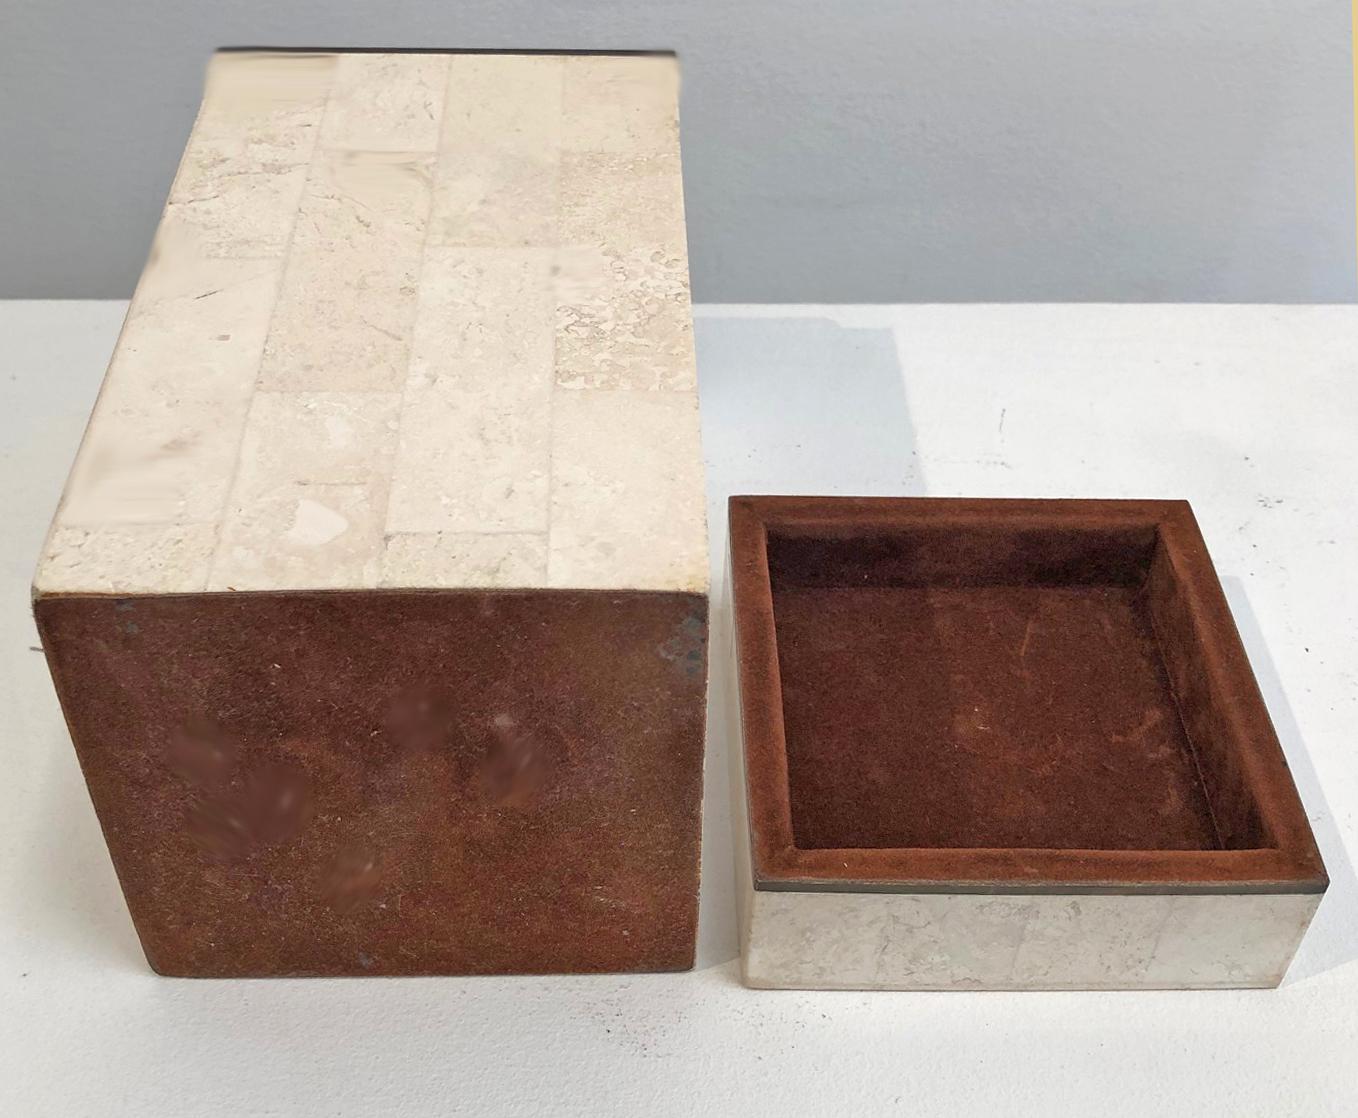 Tessellated stone box made by Maitland Smith. Travertine exterior with felt limed interior. Perfect as a desk accessory or pencil holder.

Complementary delivery in the Los Angeles / Beverly Hills area. Pick up is also an option.